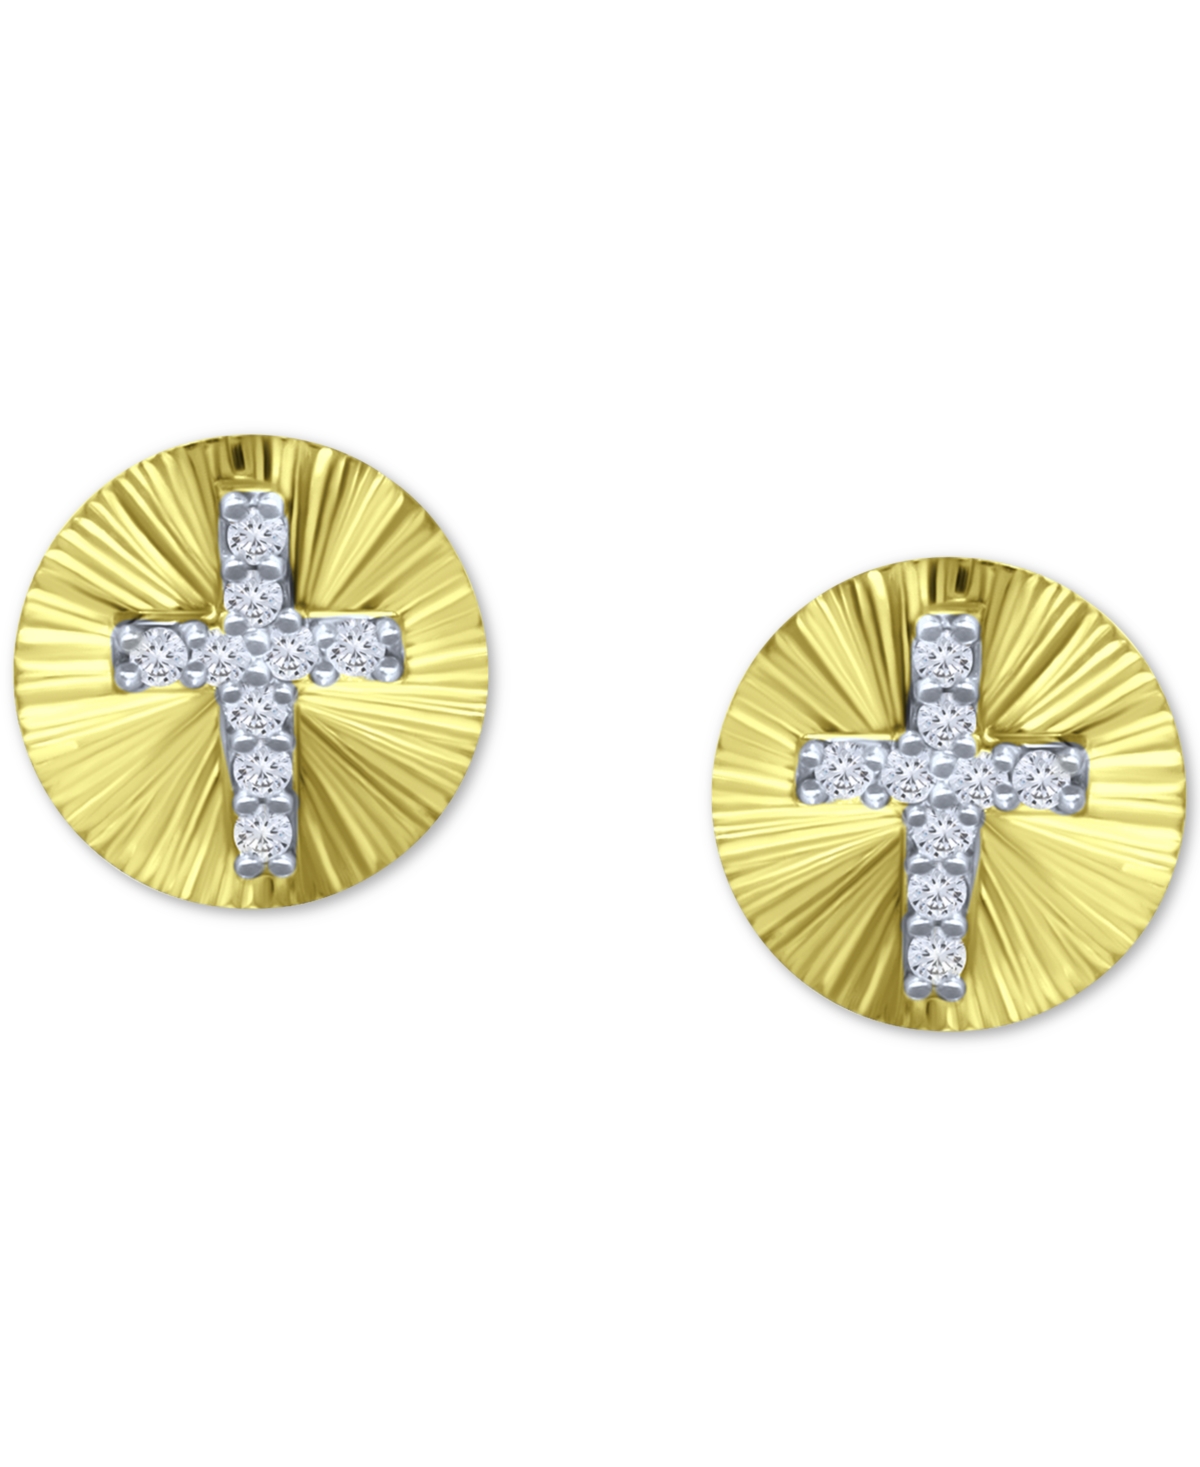 Cubic Zirconia Cross Disc Stud Earrings, Created for Macy's - Gold over Silver